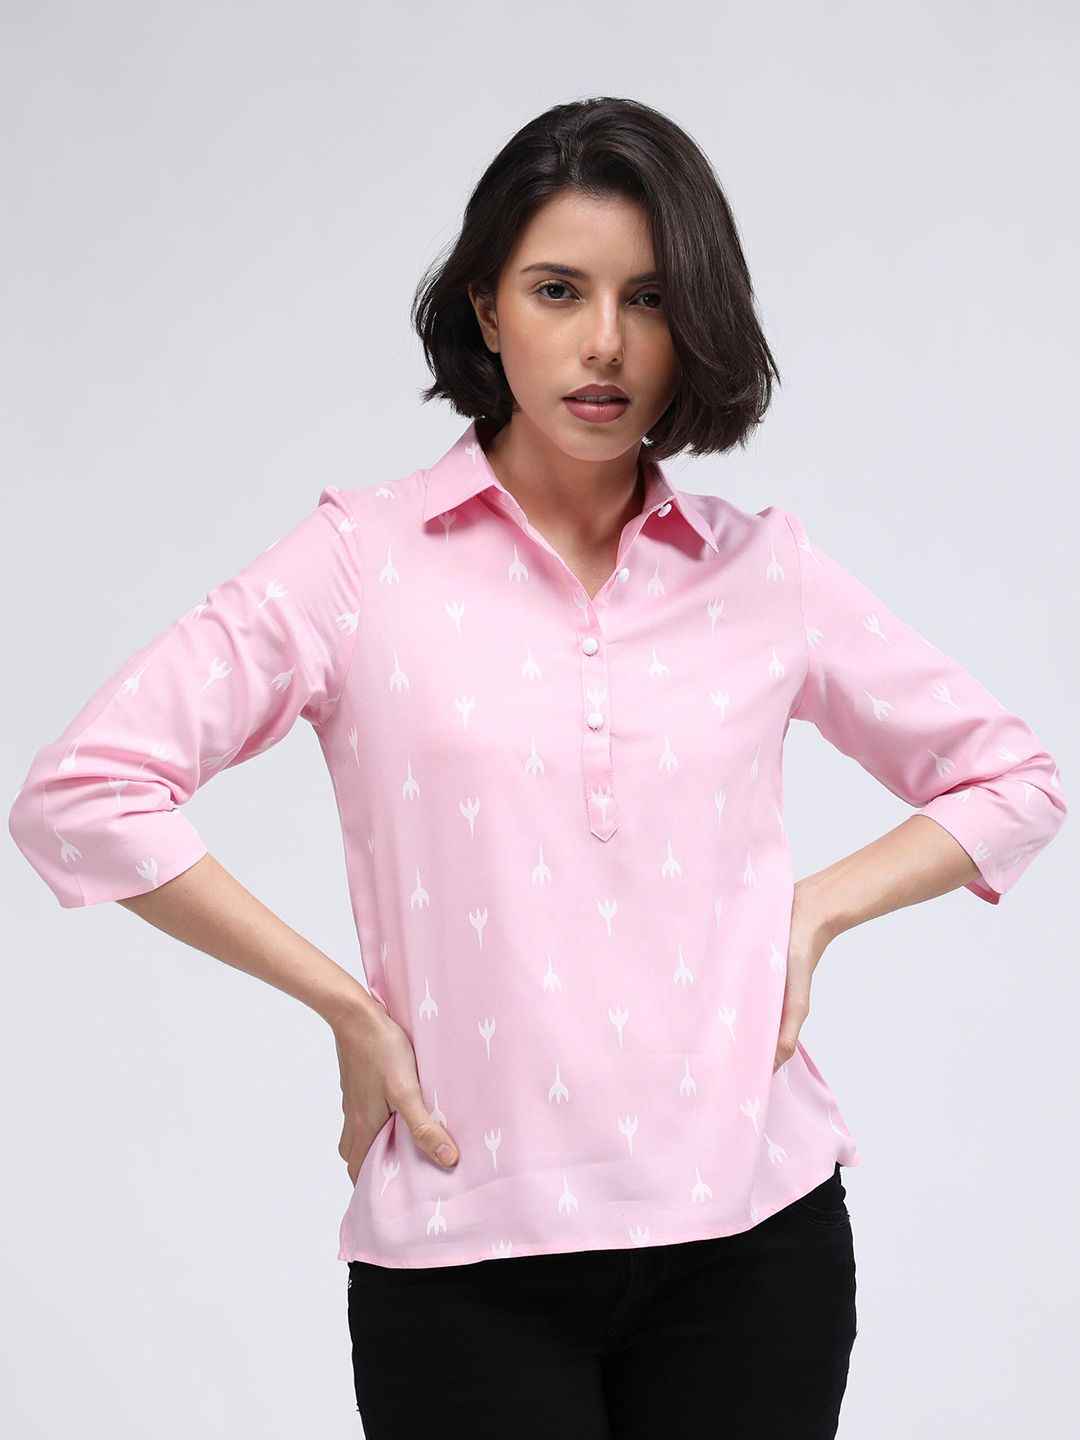 IDK Pink Print Shirt Style Top Price in India